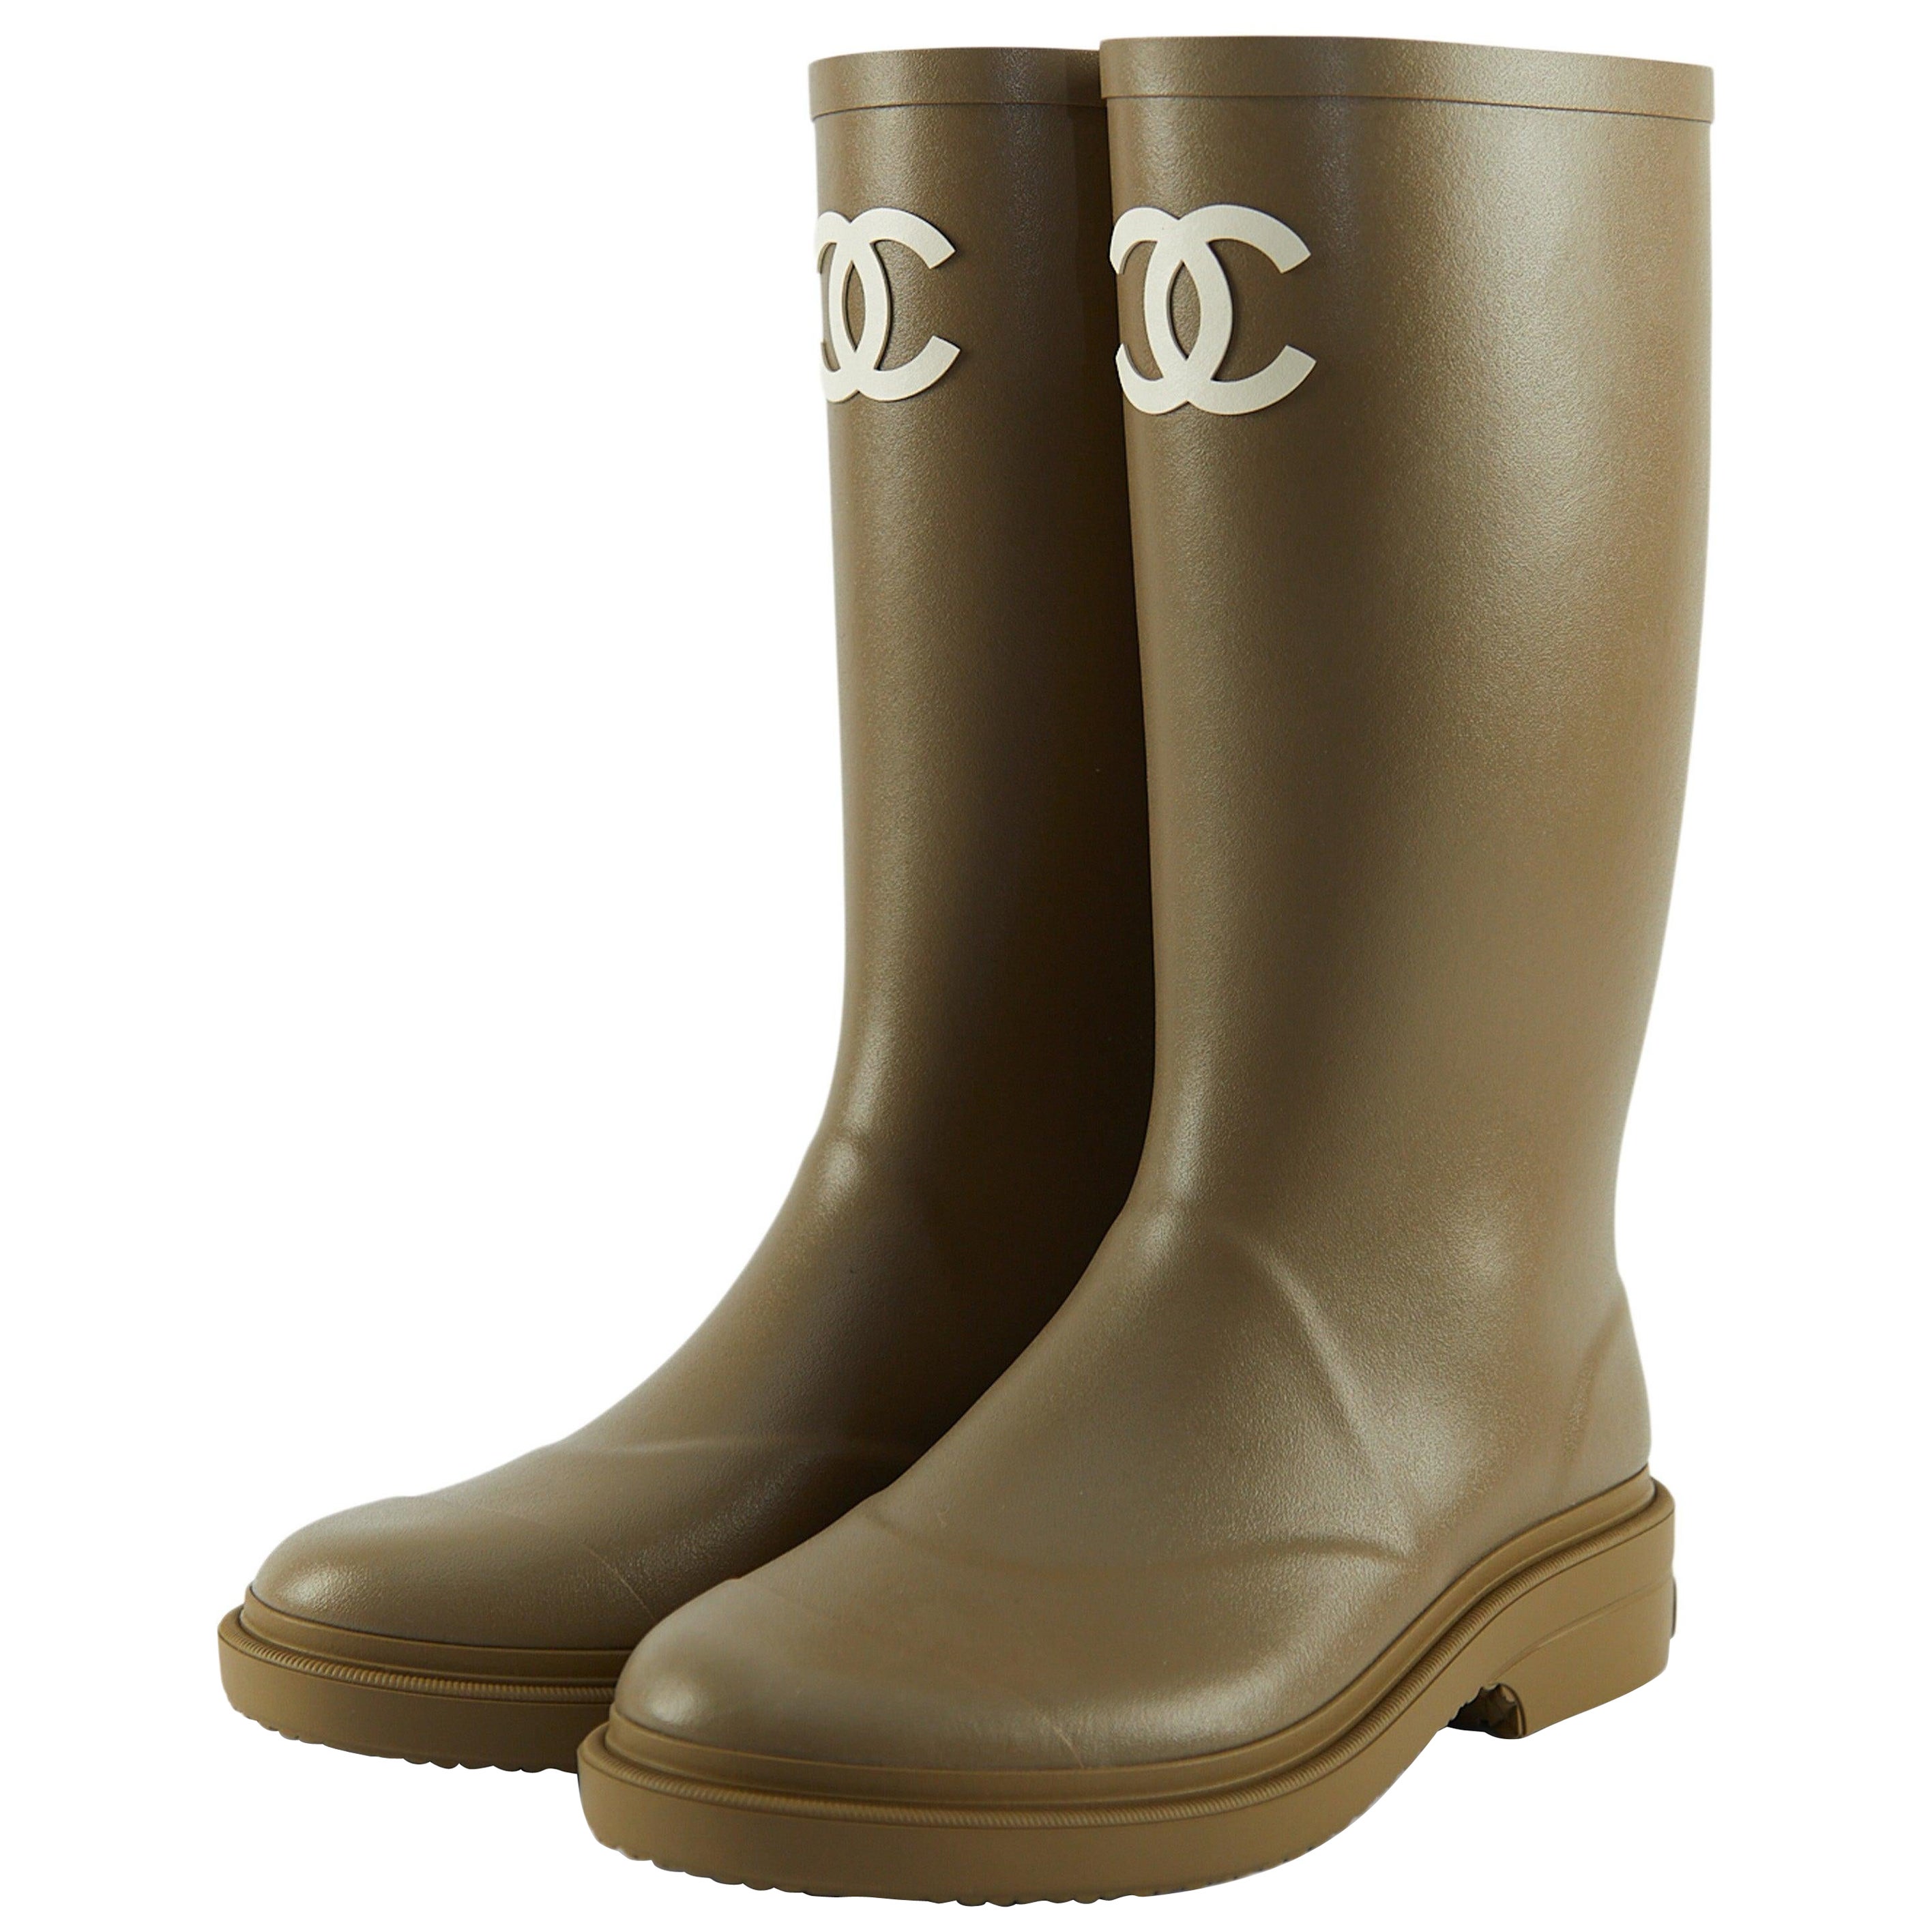 CHANEL WELLIES Khaki - Size 38 For Sale